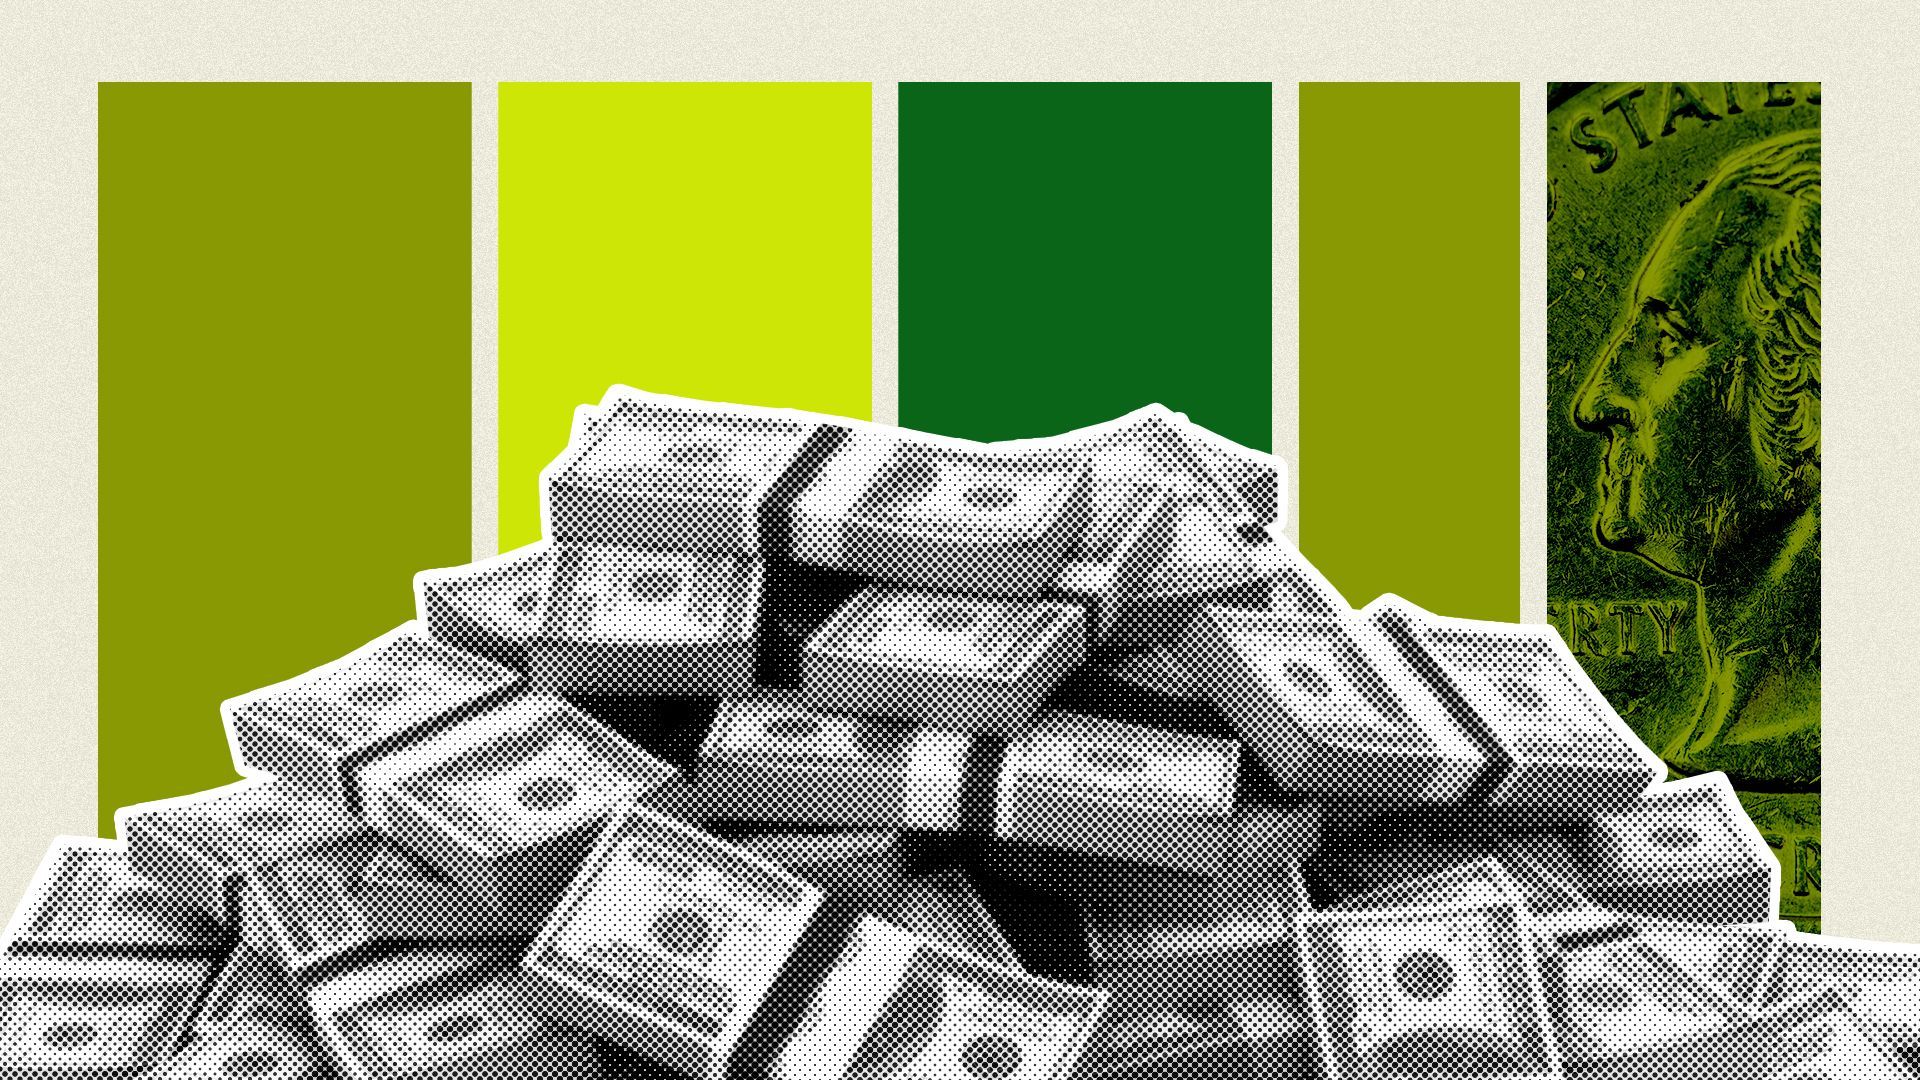 Illustration of a pile of money in front of abstract shapes.